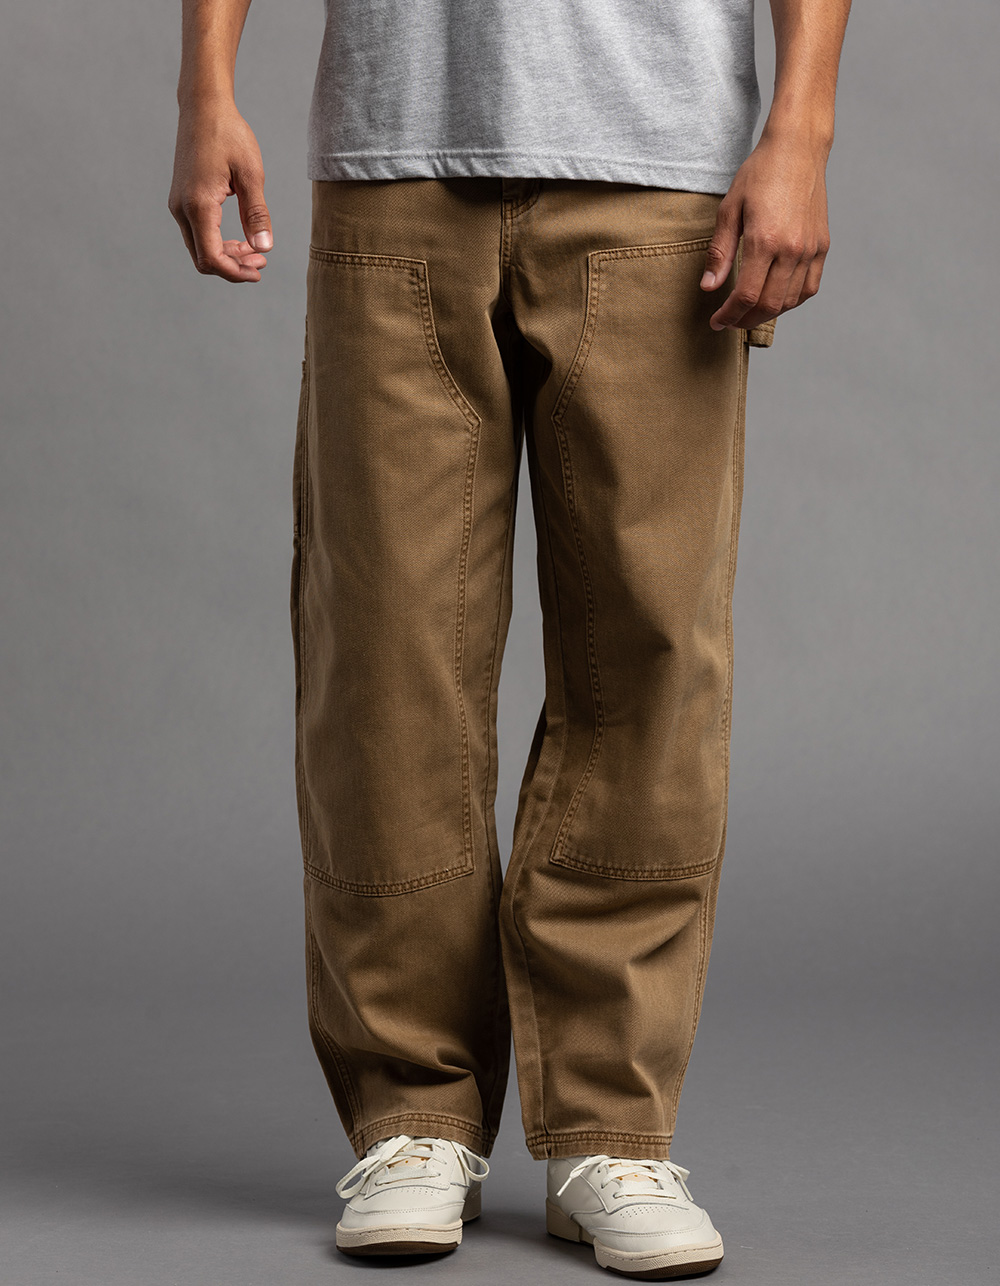 RSQ Mens Twill Utility Pants - CAMEL